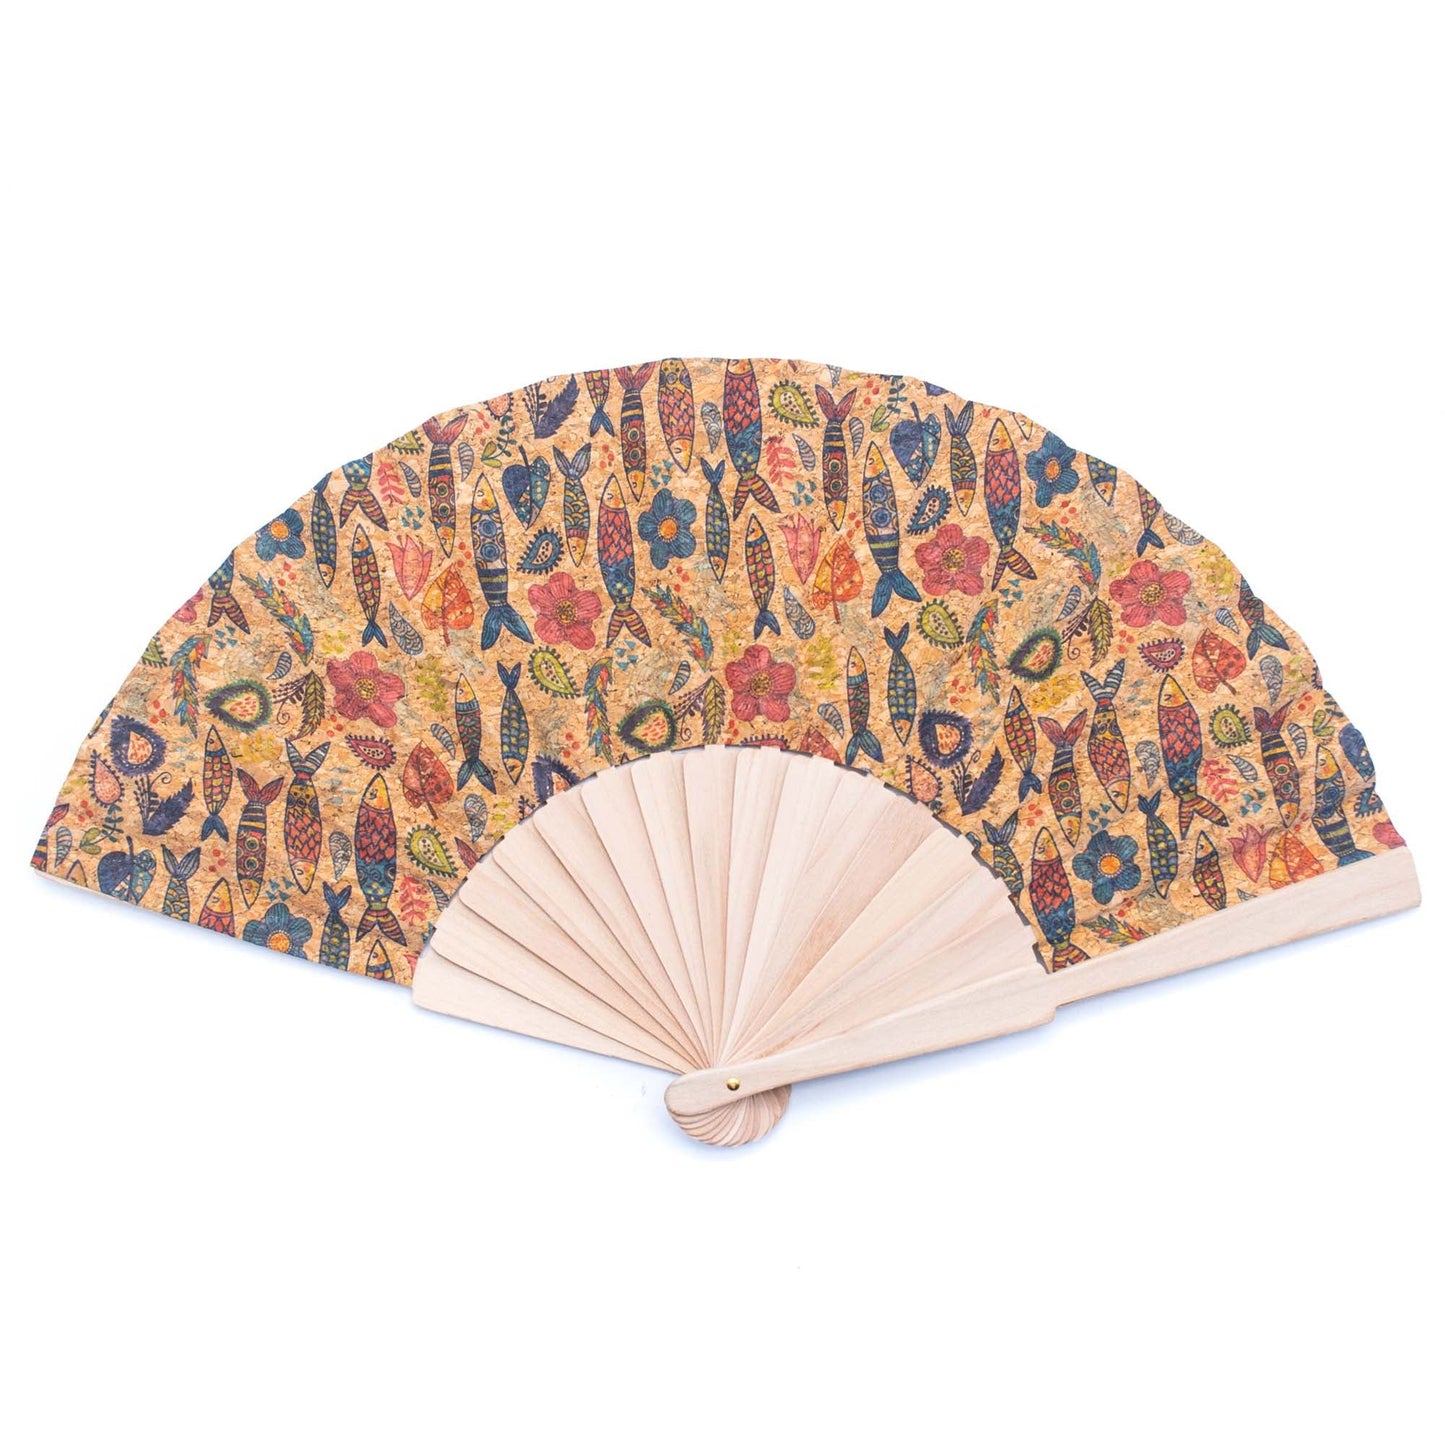 Cork Antique Wooden Folding Hand Fan w/ Box | THE CORK COLLECTION